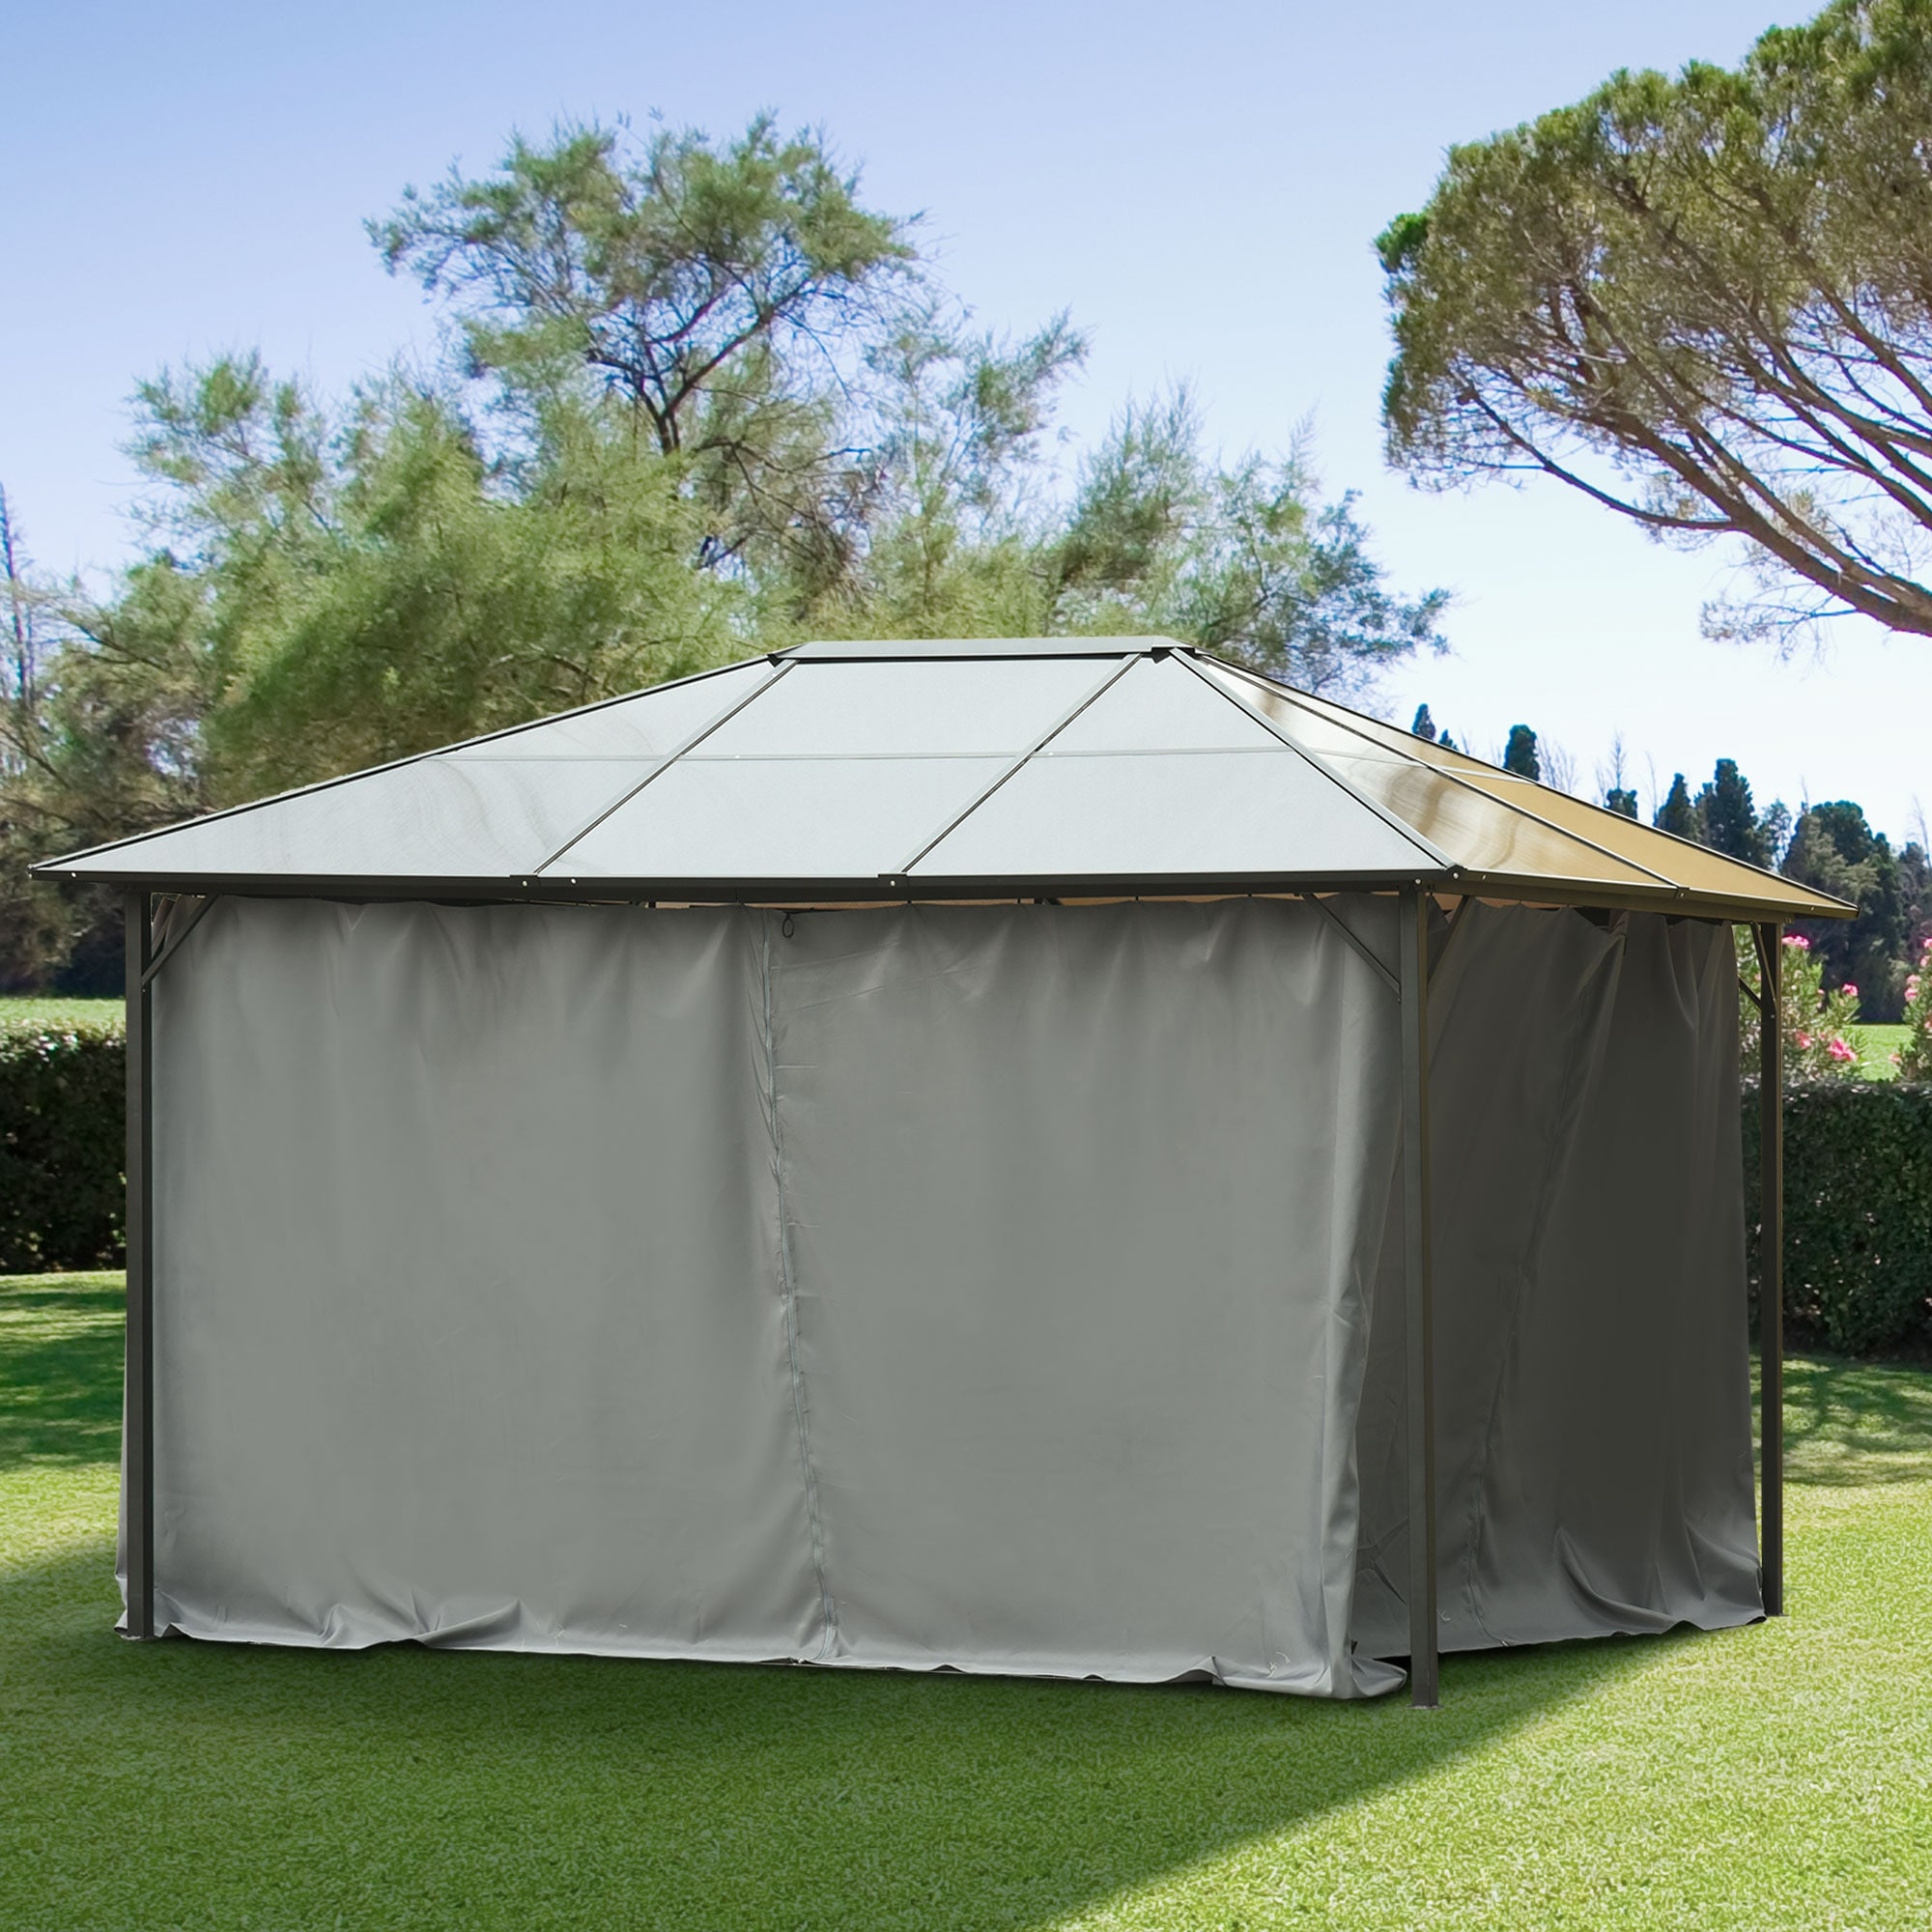 Sunshine Outdoor Privacy Gazebo Curtains Replacement Universal Curtain Sidewalls 4-Panels Set Only Curtains Garden for Patio Yard 10' x 10', Beige 